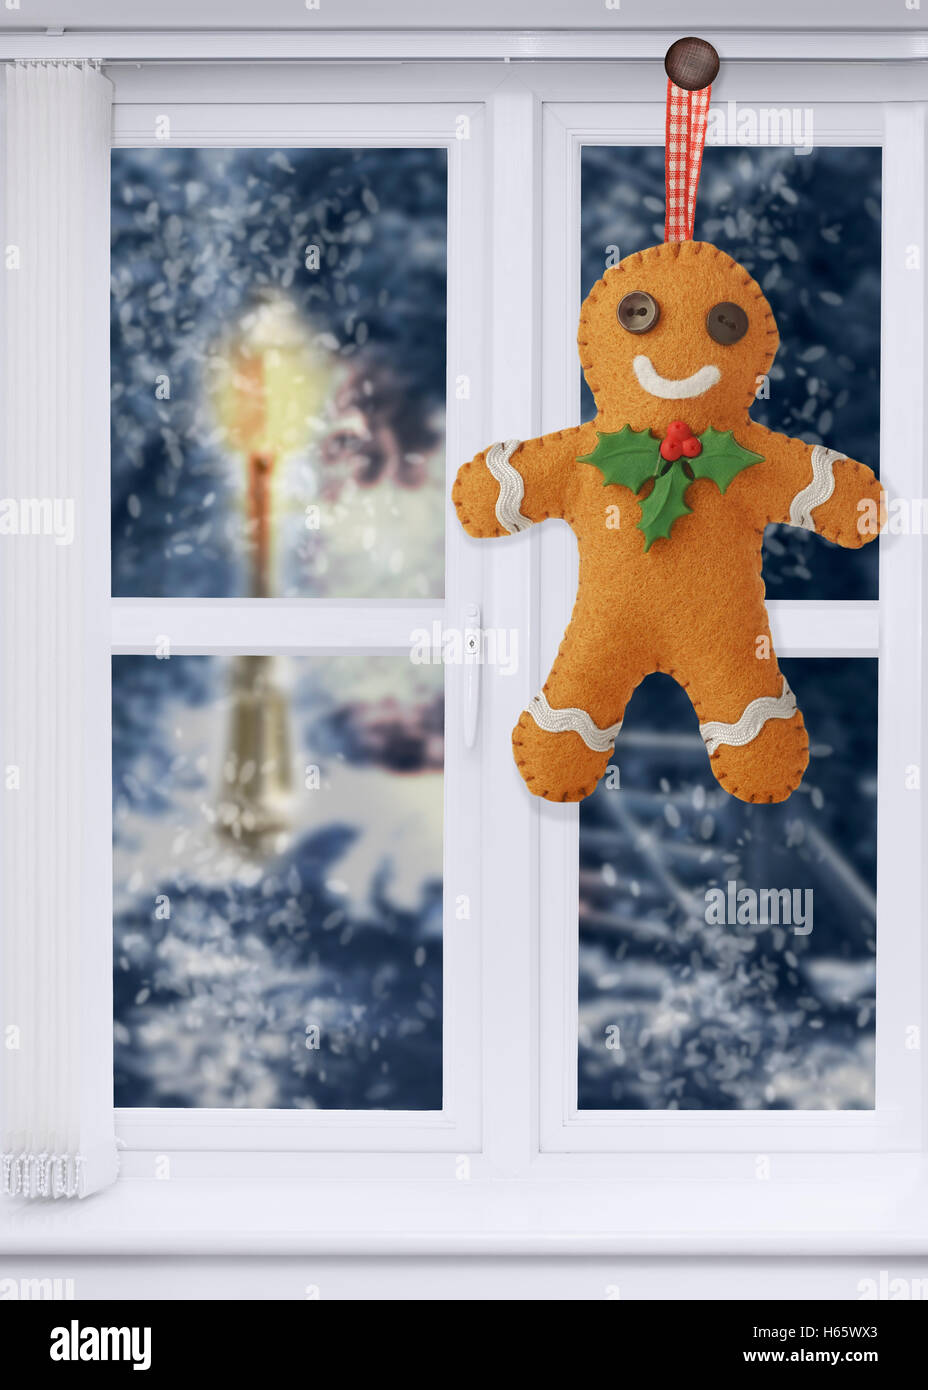 Gingerbread man decoration hanging in the window with snow scene outside Stock Photo